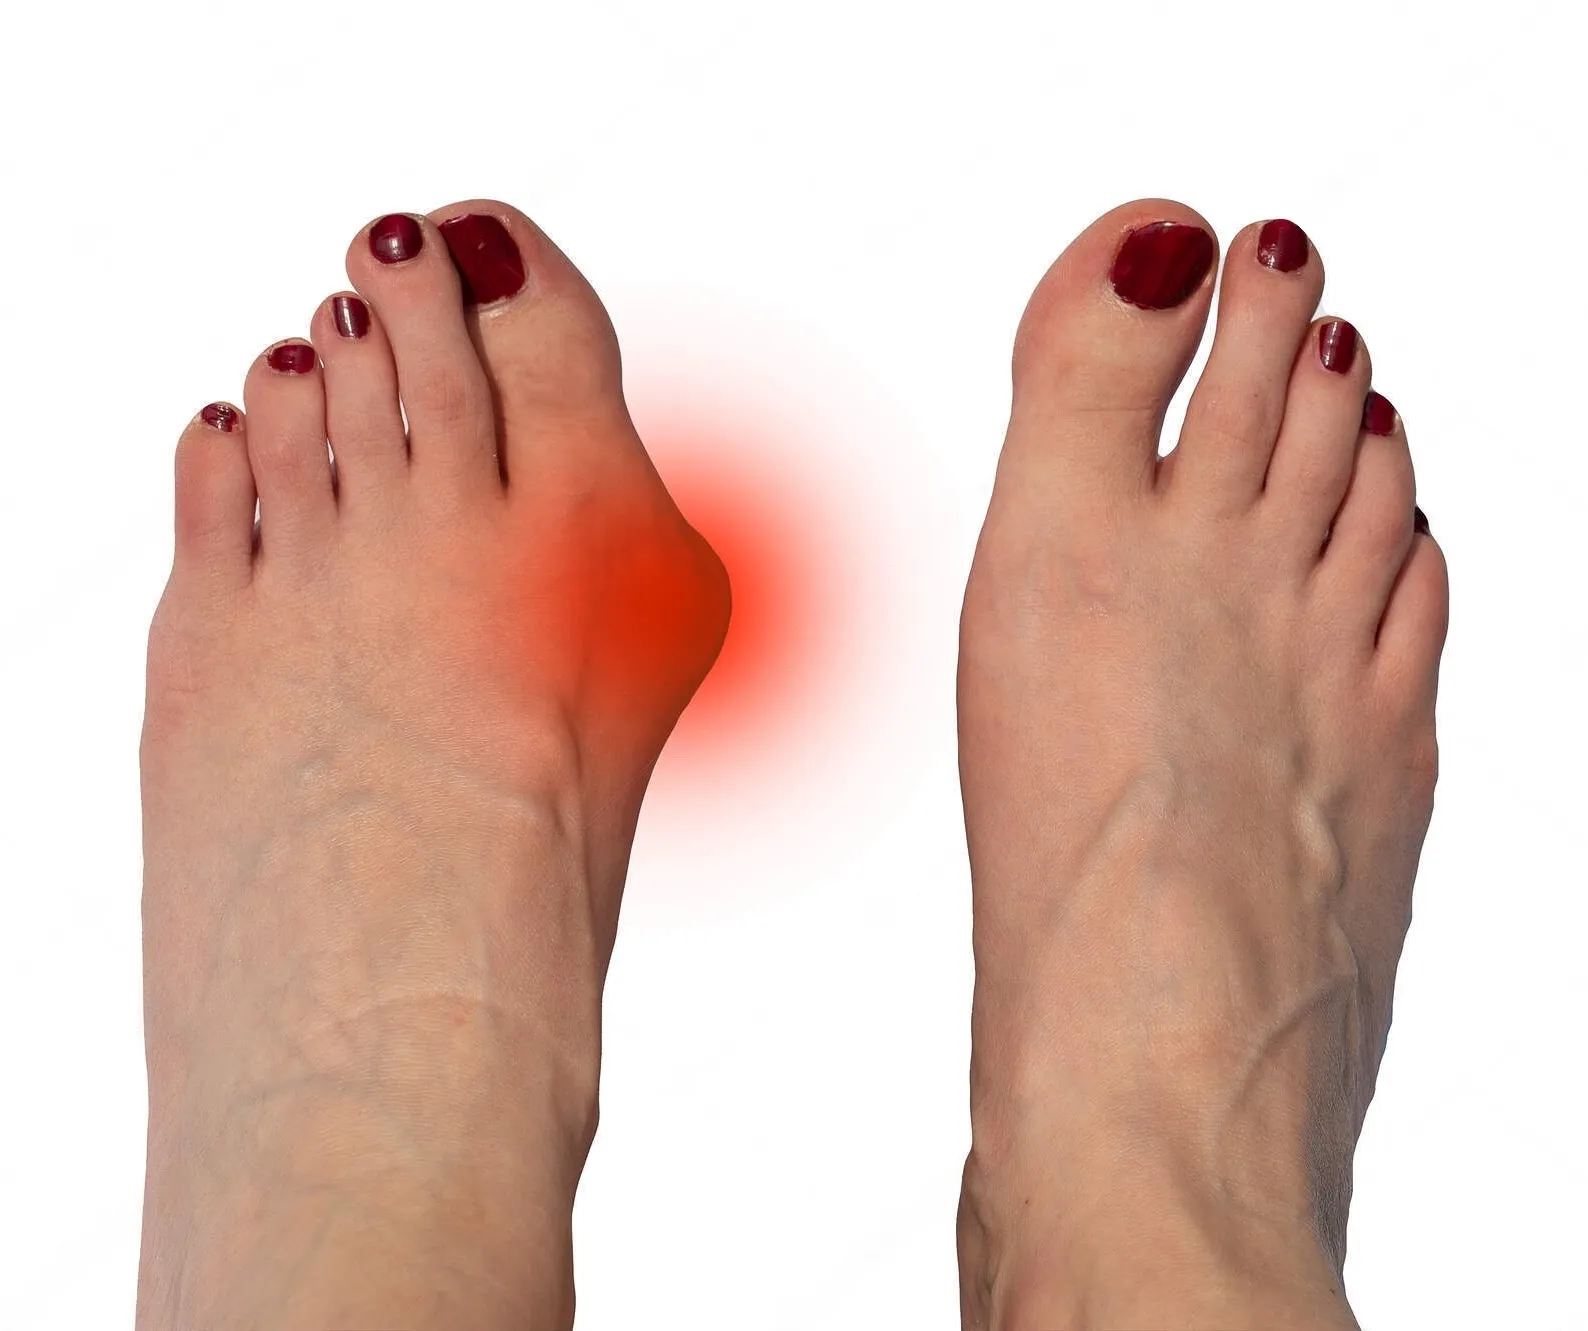 HOW CAN I SHRINK MY BUNIONS NATURALLY?